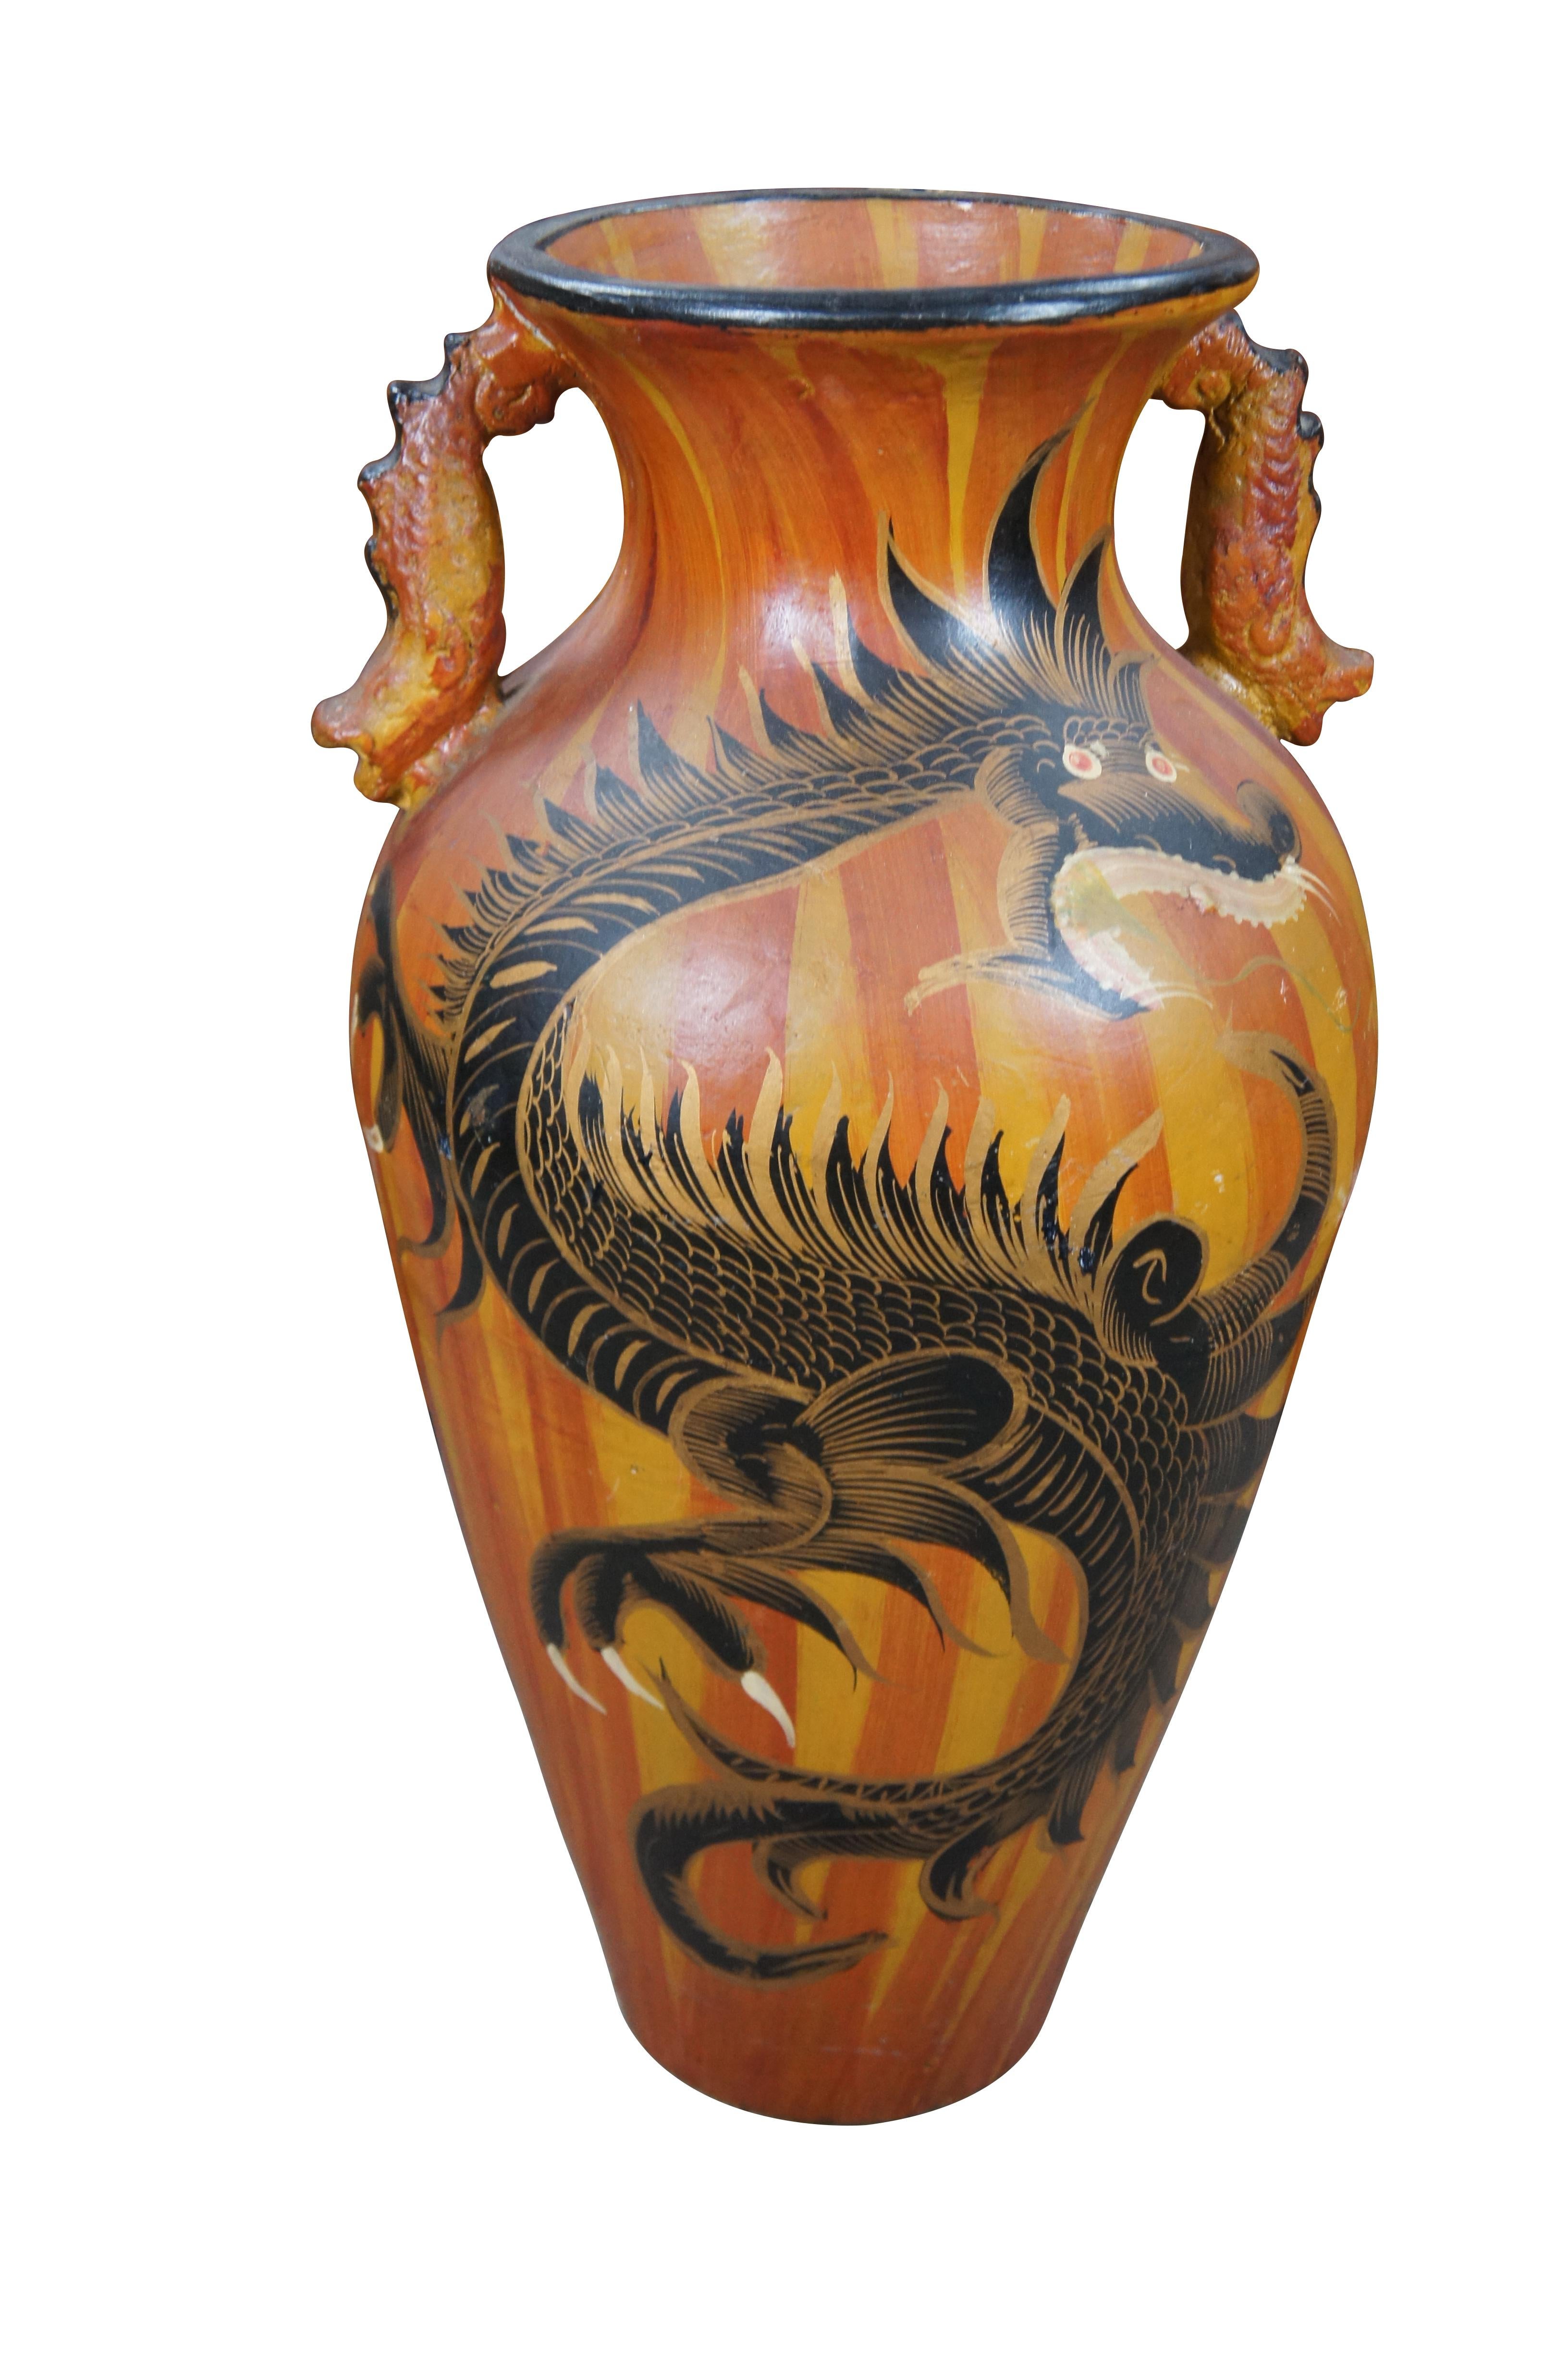 Large handled jar with a chinoiserie motif. Made from Terracotta with a dragon / floral motif painted over a red and yellow foreground. Features handles along the top.

Dimensions:
29